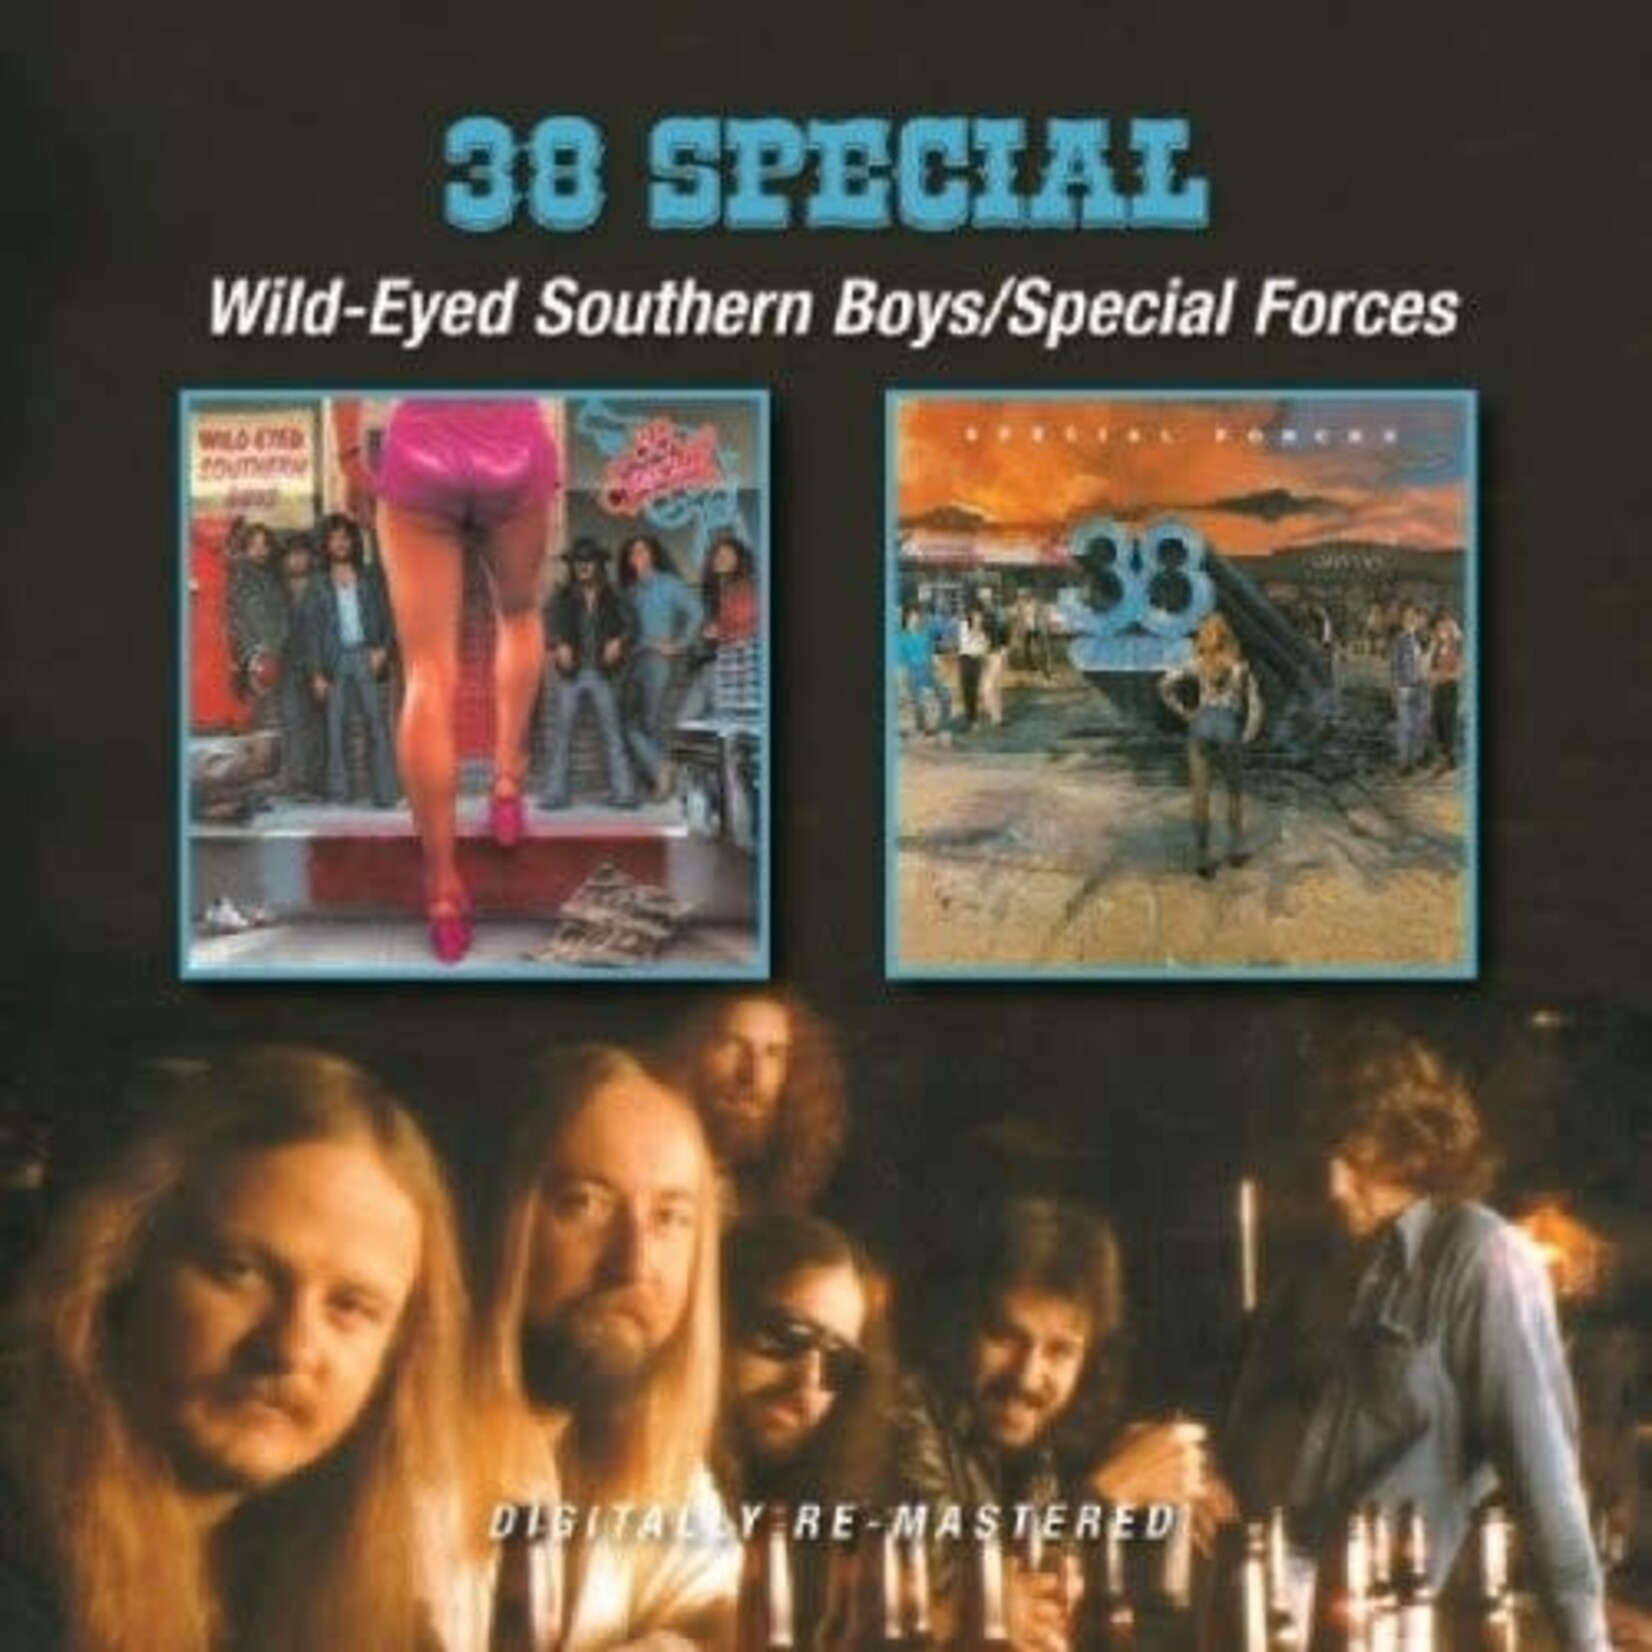 38 Special - Wild-Eyed Southern Boys/Special Forces [CD]